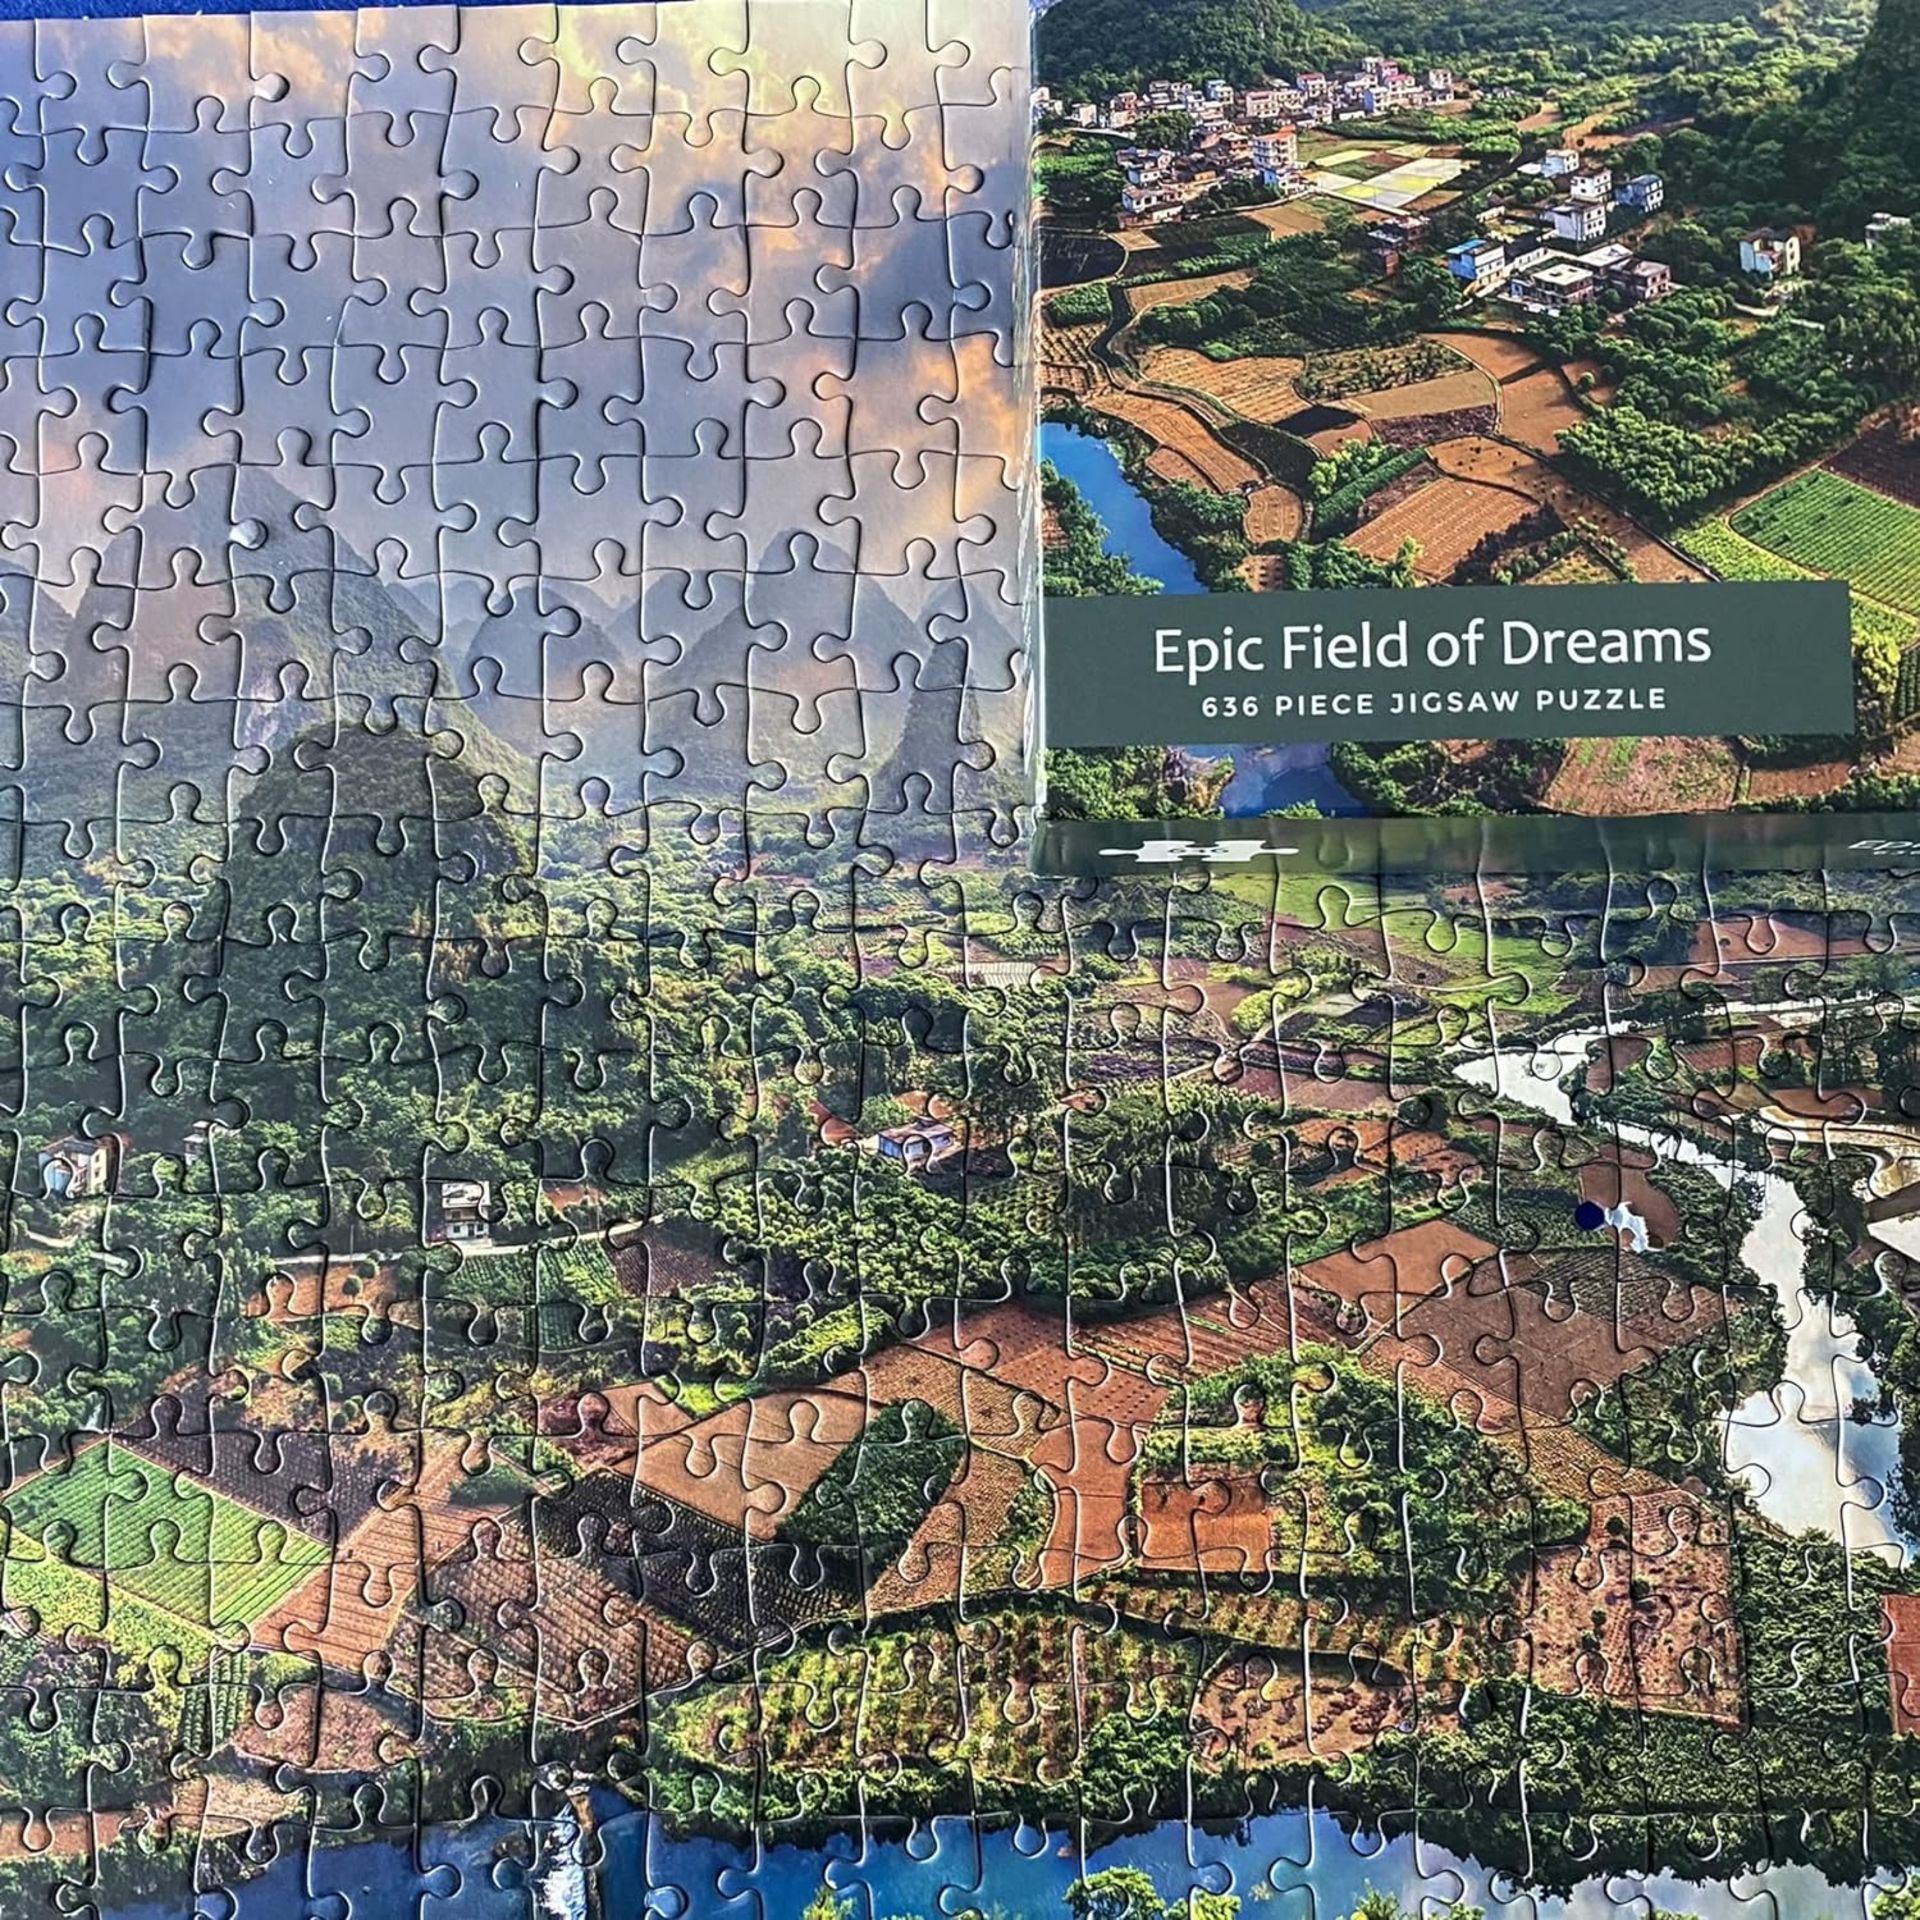 100 X NEW EPIC FIELD OF DREAMS PUZZLE (636 PR) - Image 4 of 8